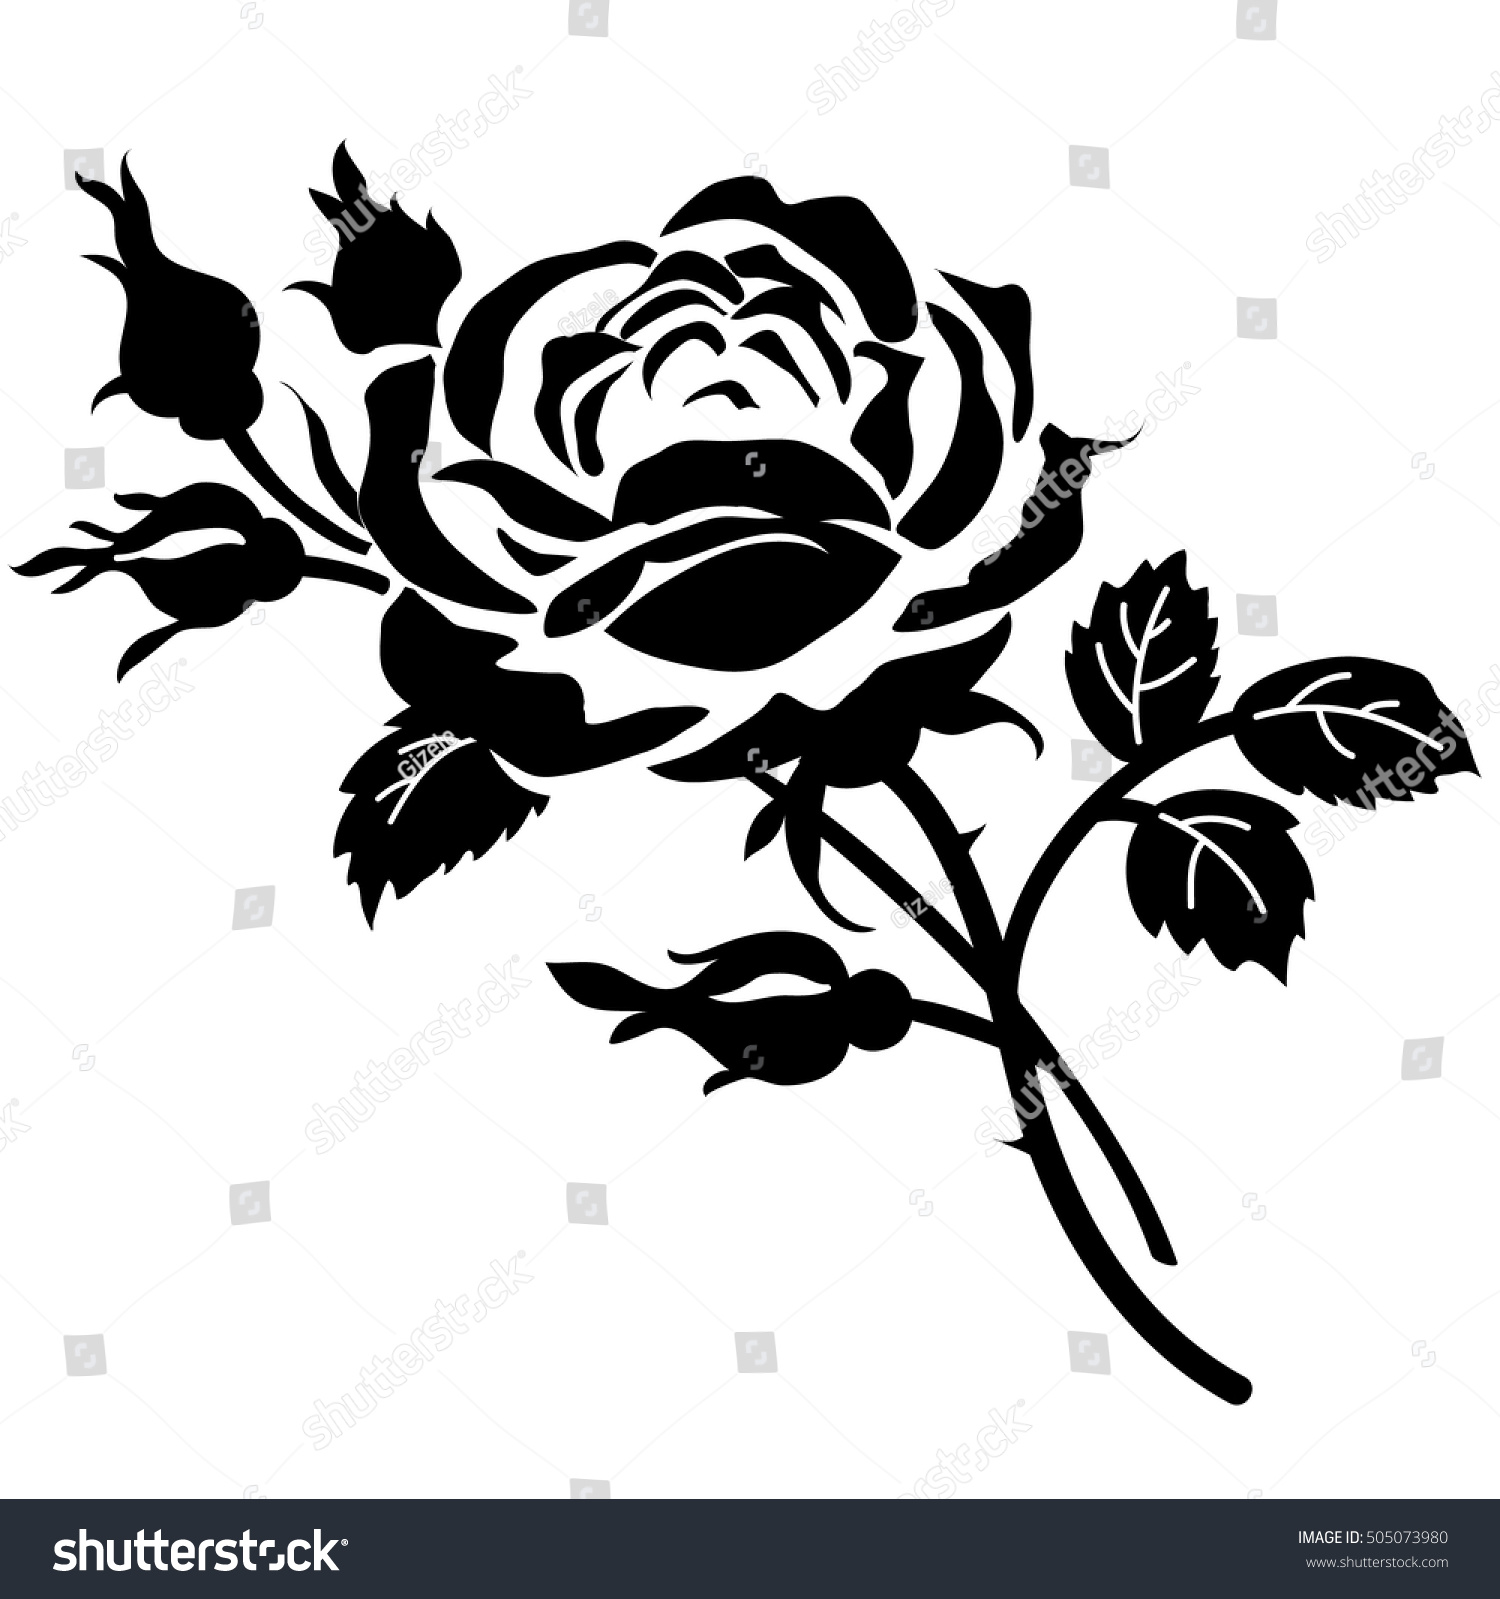 Vector Decorative Rose Silhouette Stock Vector (Royalty Free) 505073980